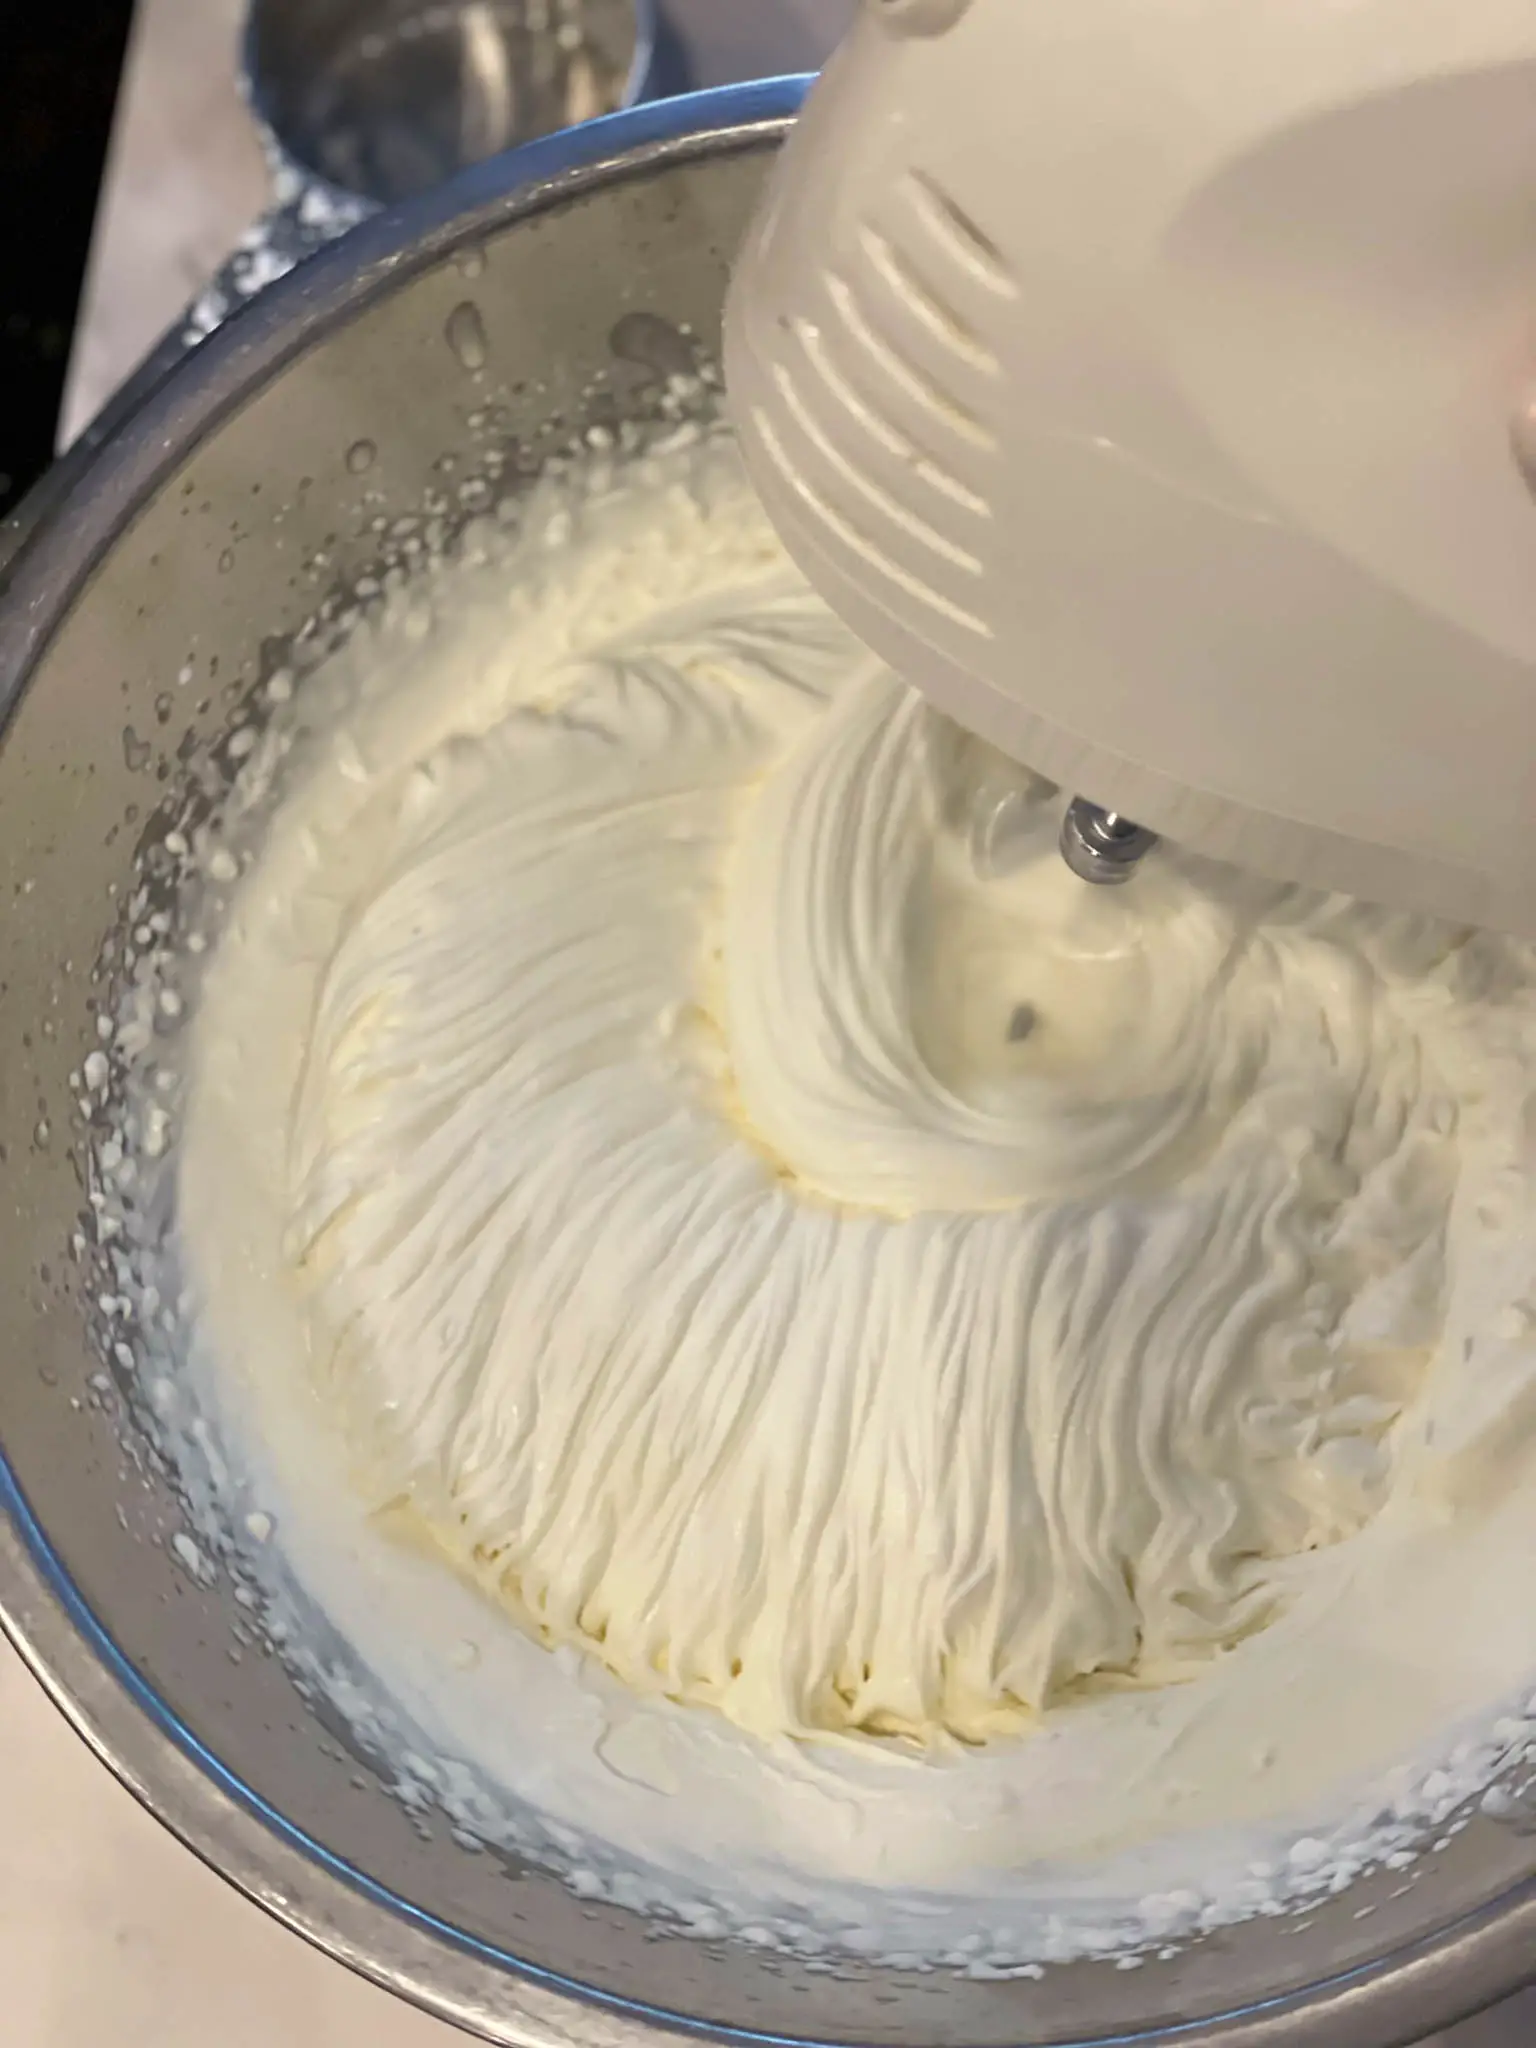 Stiff peaks forming while whipping the cream, sugar and vanilla.